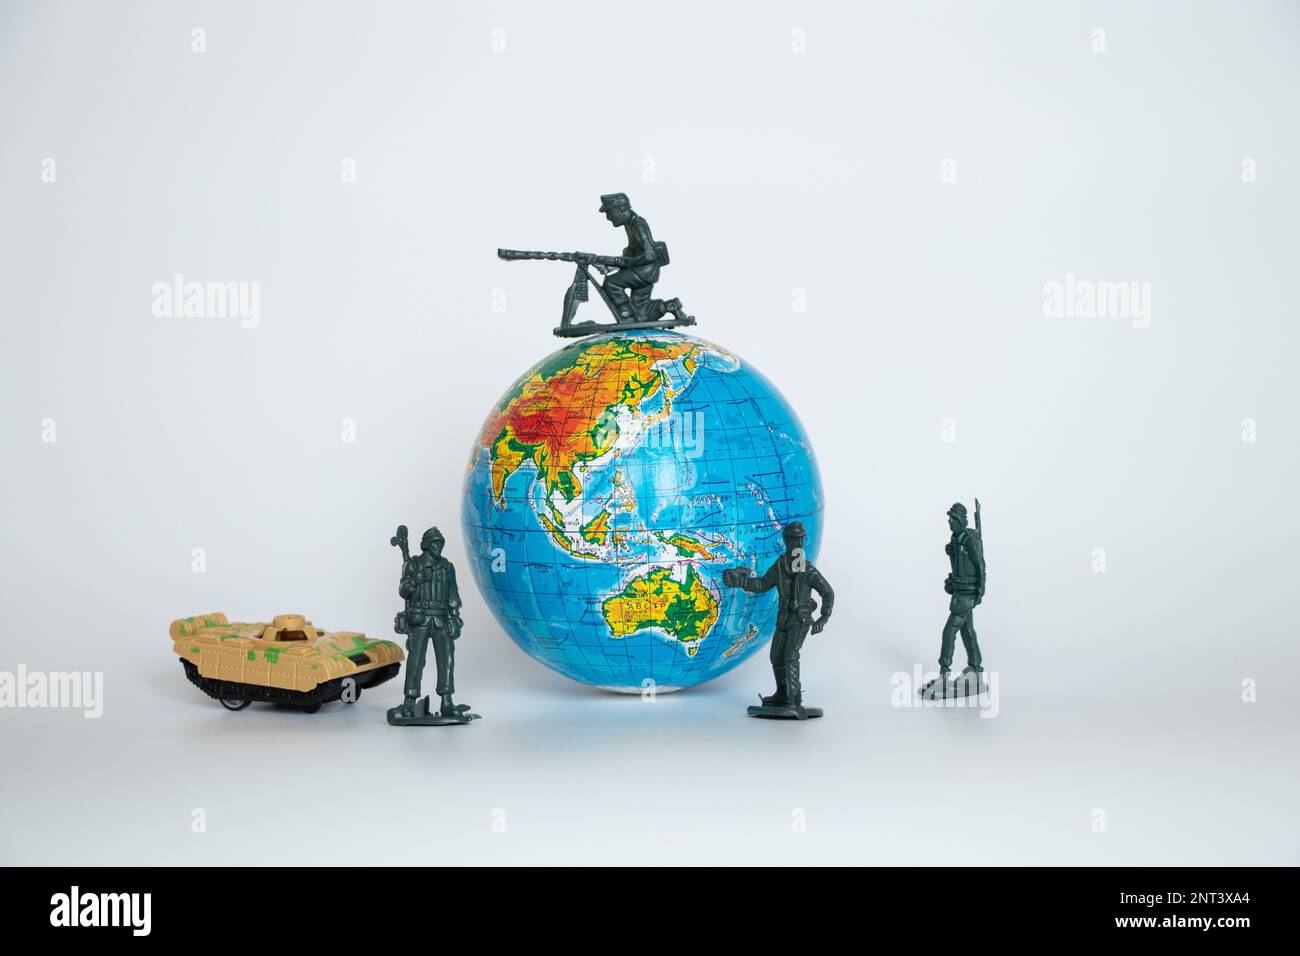 Globe in Ukrainian and plastic soldiers and tank children's toys on a white background close -up, army Stock Photo